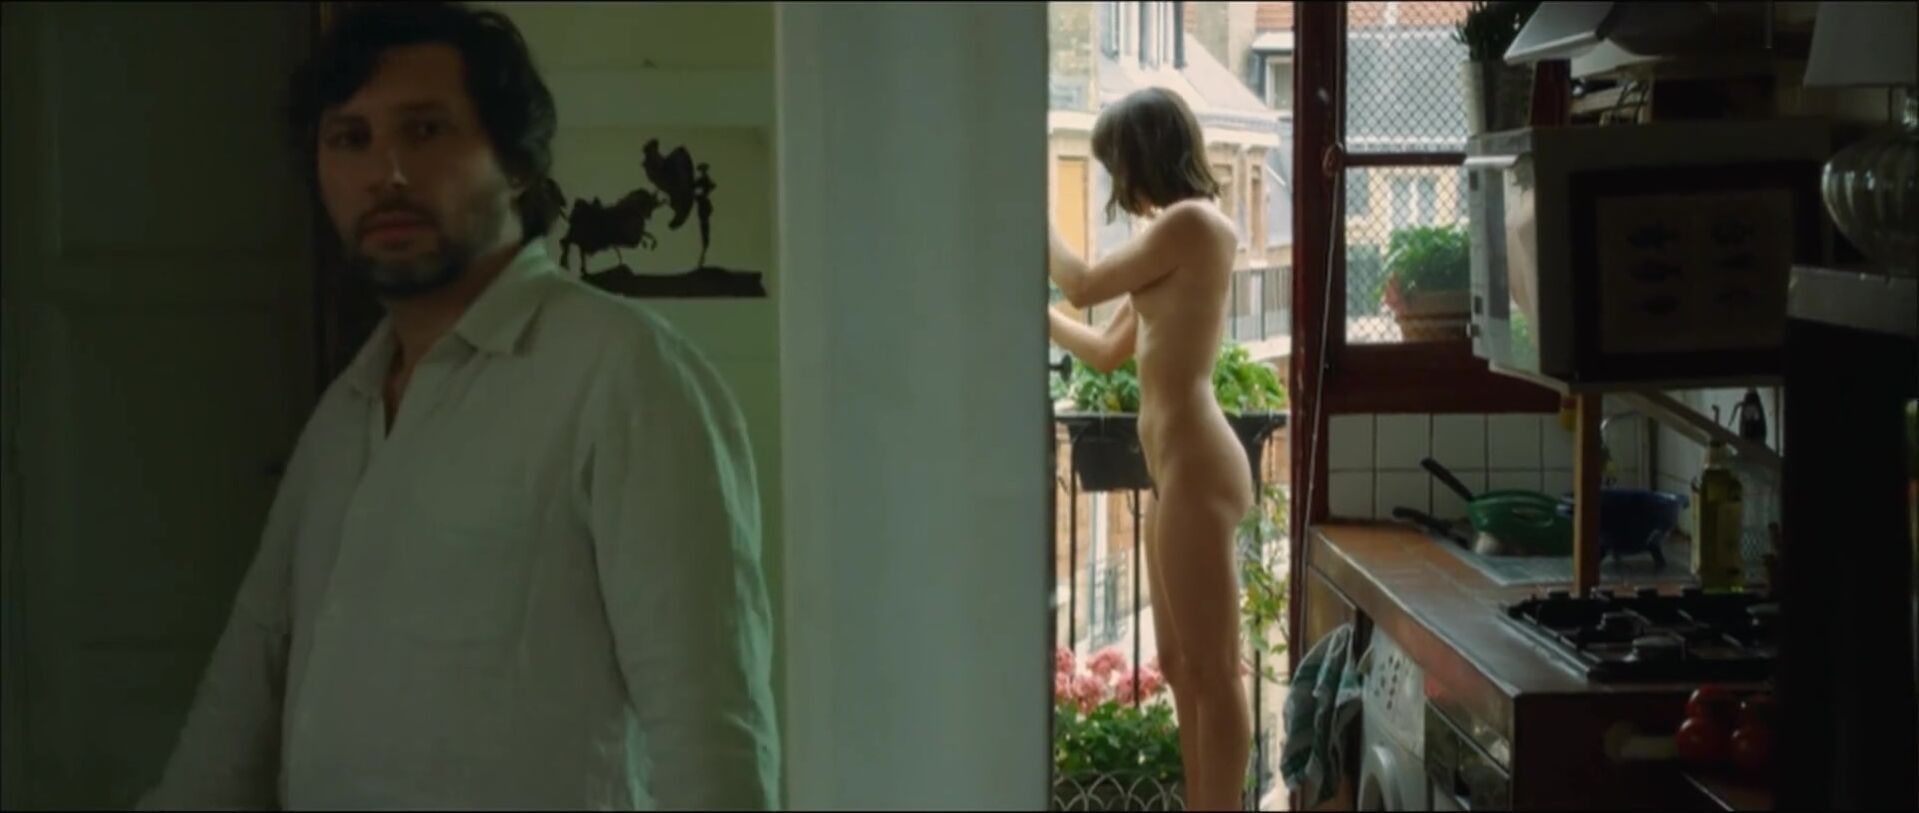 Gay Natural Lewd Vimala Pons is watched by man smoking on balcony in J'aurais Pu être Une Pute Anal